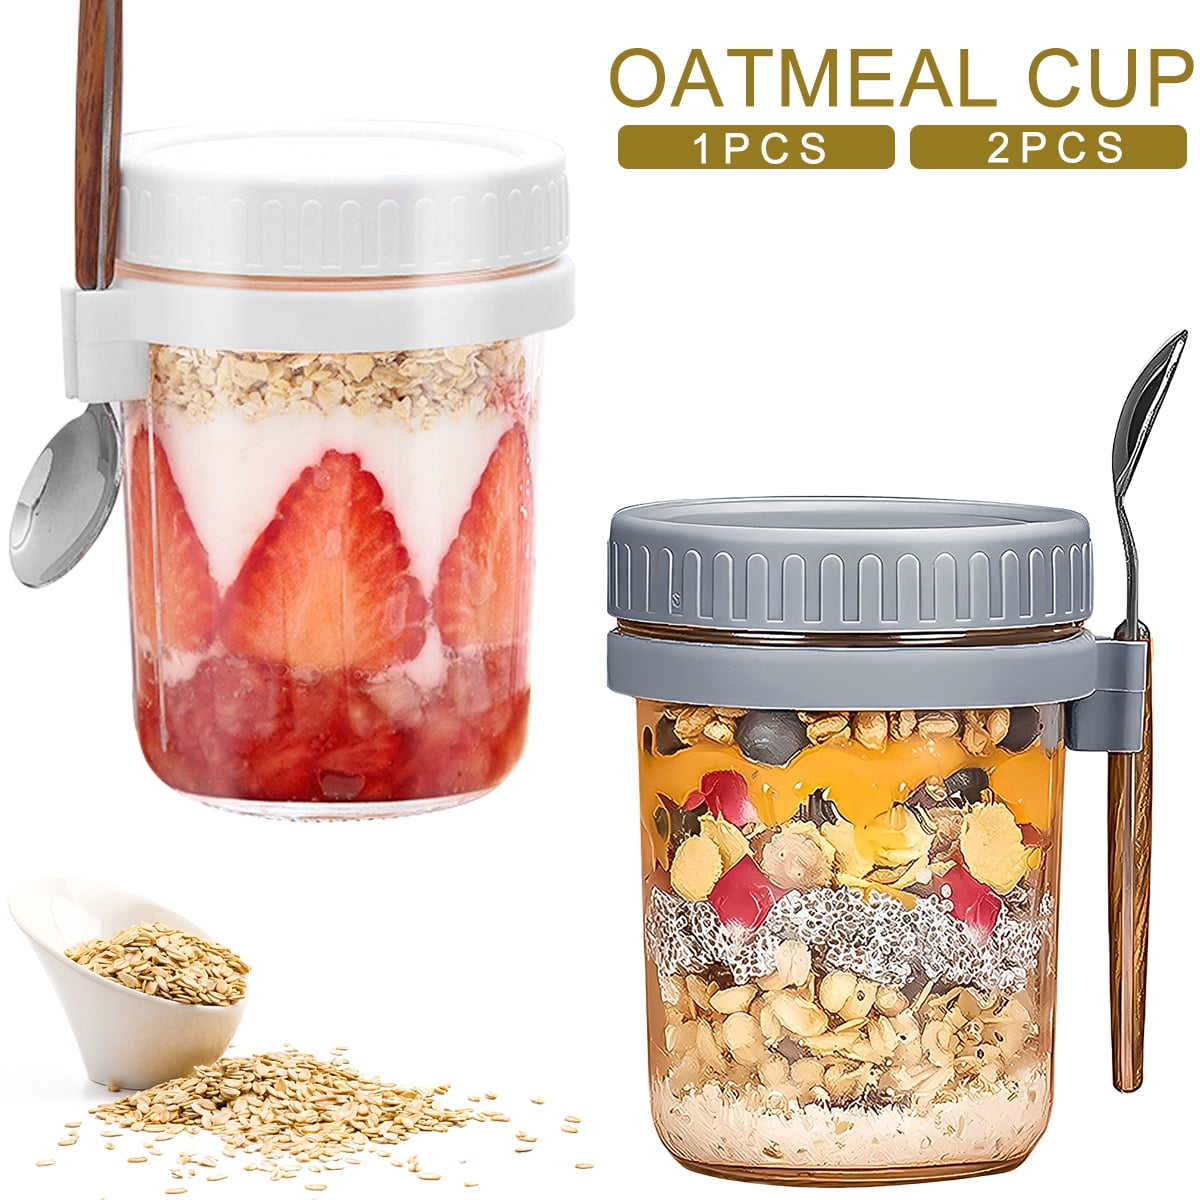 HBlife 4-Piece Overnight Oats Containers with Lids and Spoons, 16 oz Glass  Mason Jars Oatmeal Cups Container for Overnight Oats